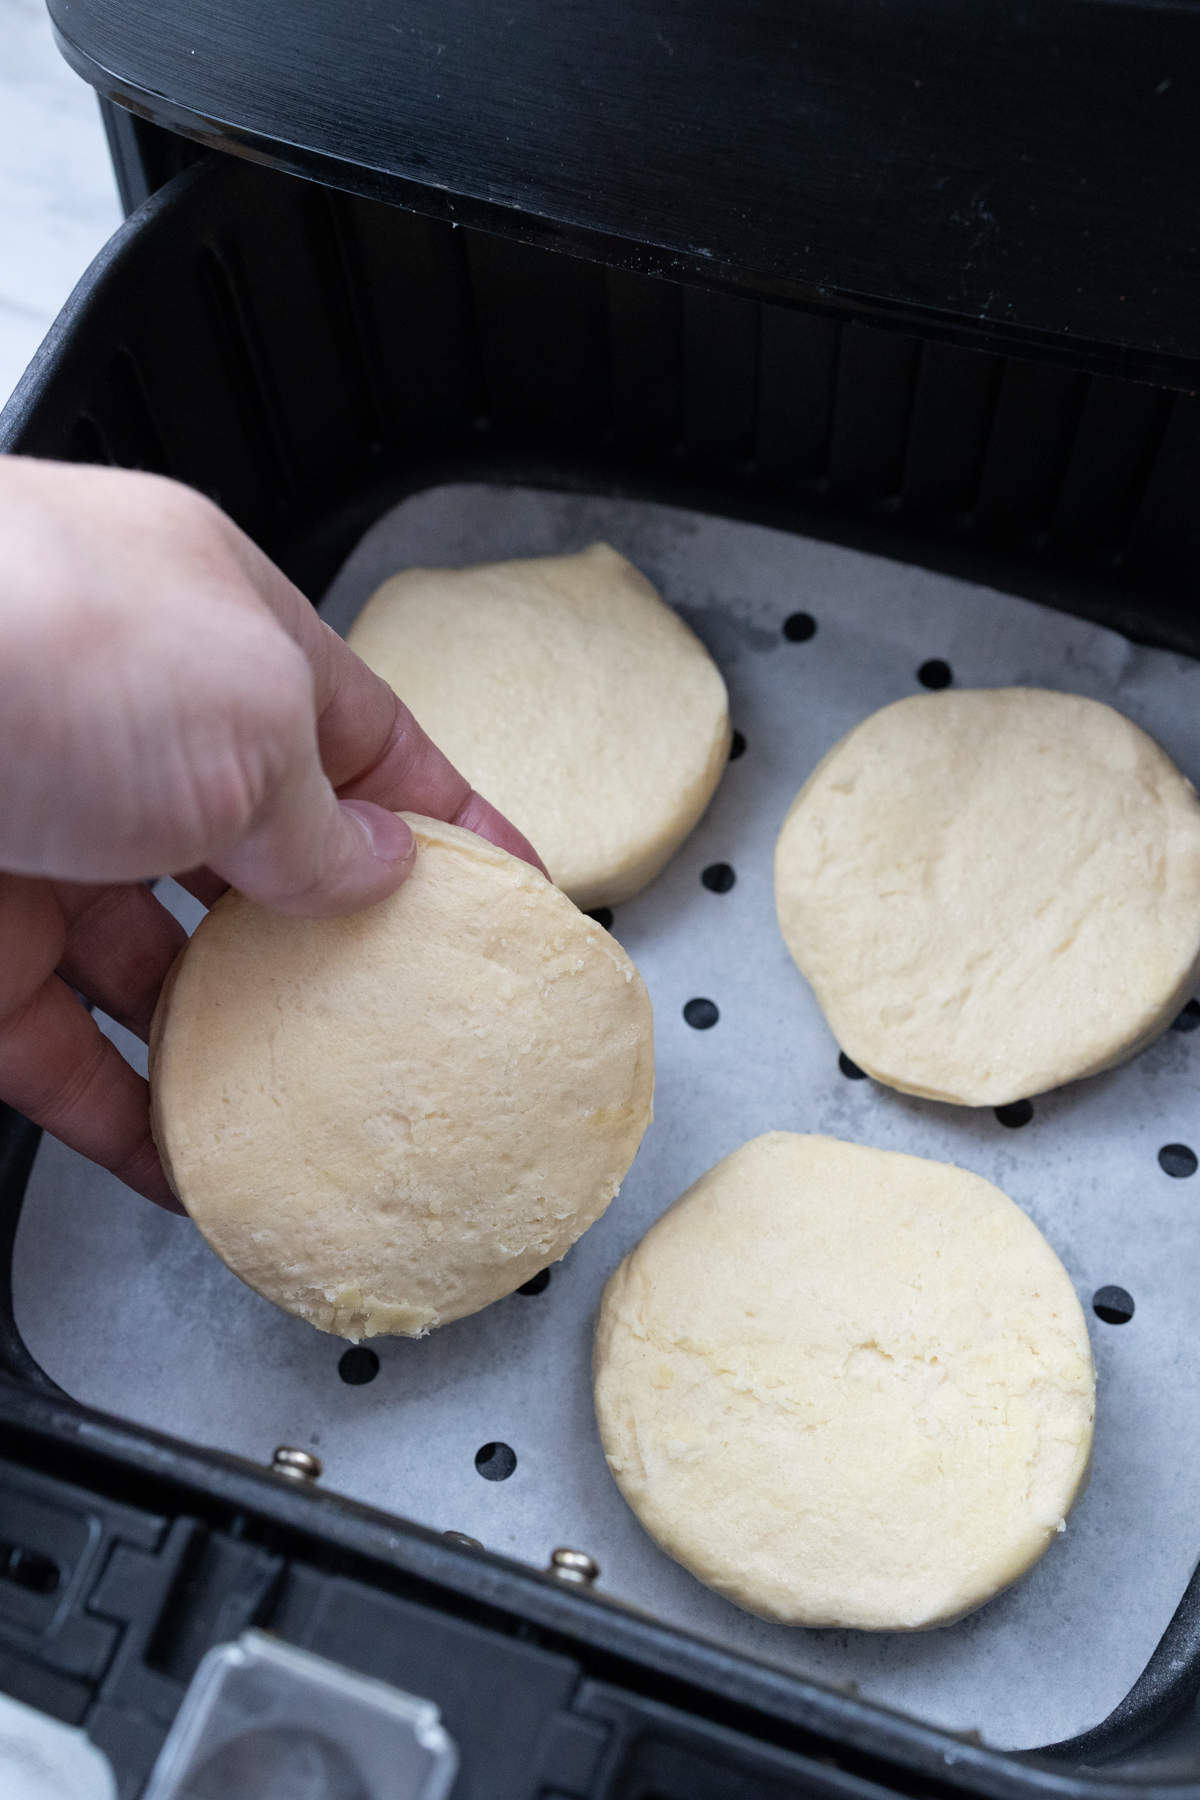 Close up view of a hand placing Pillsbury Grand Biscuits into an open air fryer.